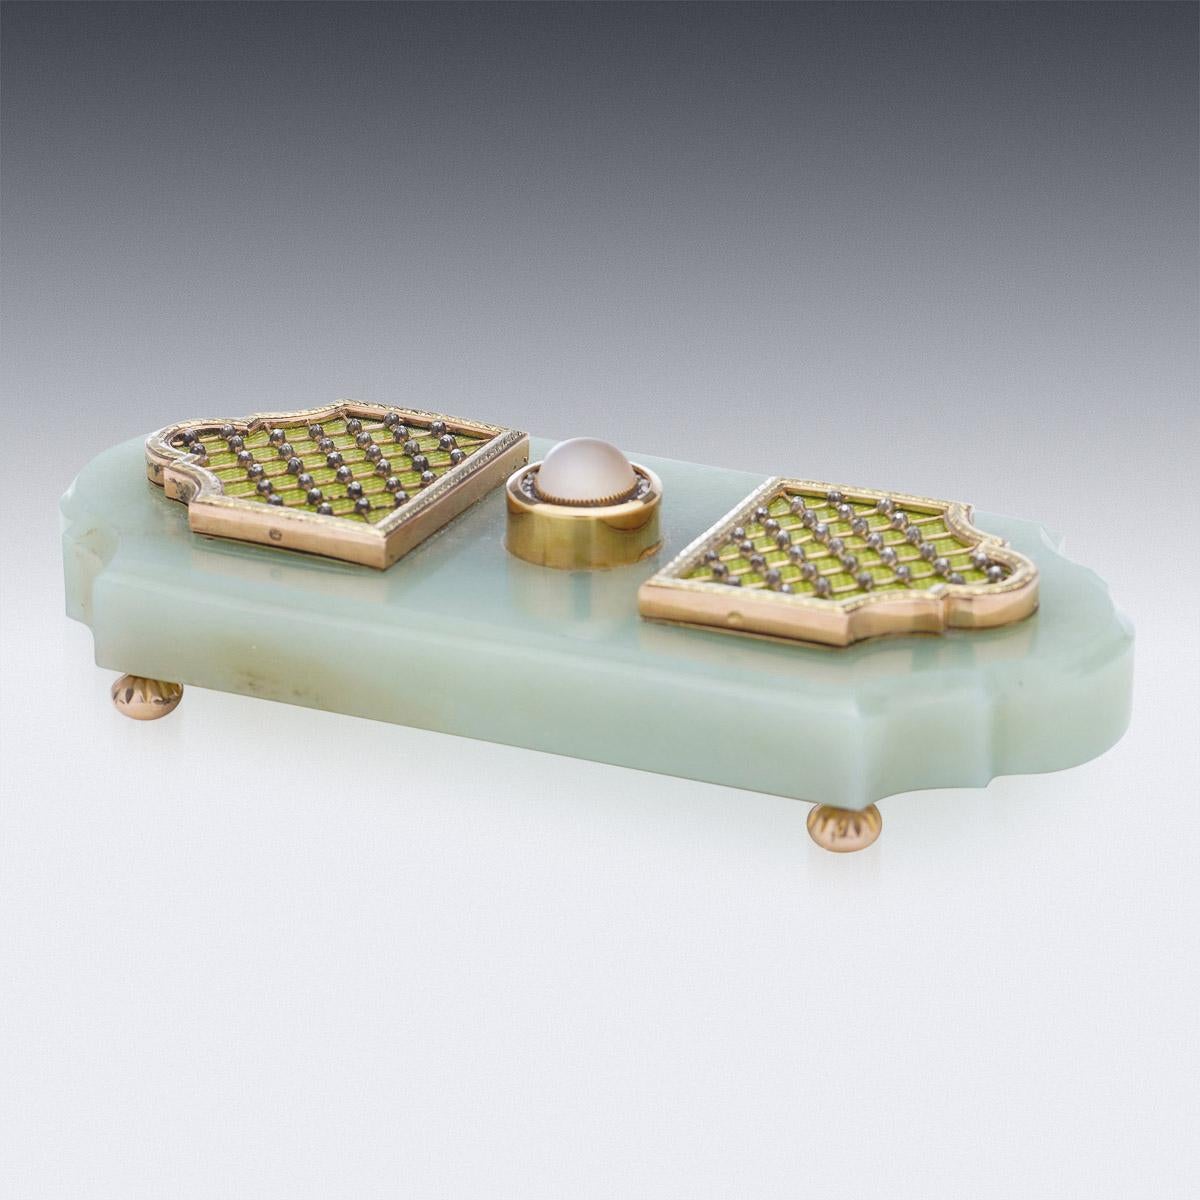 20th Century Imperial Russian gold & guilloche enamel on bowenite bell-push, of shaped rectangular form, set with shaped gold laurel leaf-tip panels decorated with translucent pale green enamel over hatched engine-turned ground, within a diamond set